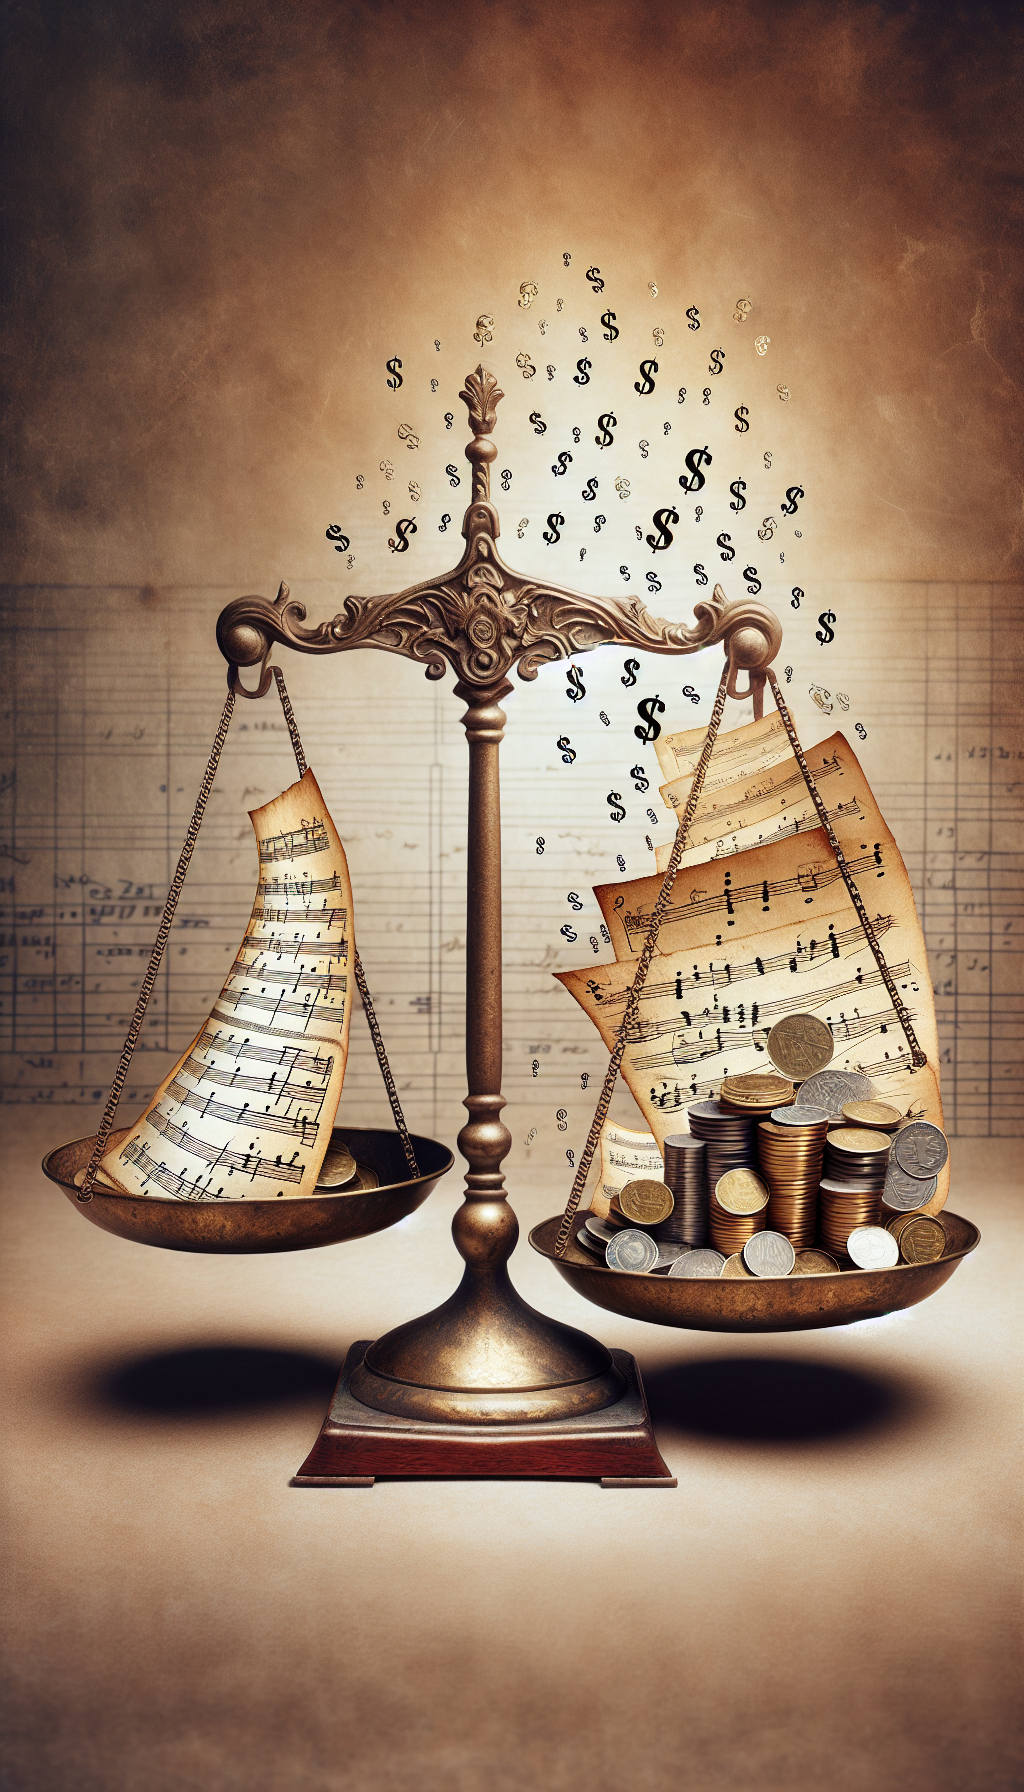 An antique scale balances a stack of timeworn sheet music on one side and a pile of golden coins and banknotes on the other, with delicate musical notes wafting towards the sky and turning into tiny dollar signs. The backdrop features a translucent ledger line, subtly hinting at the scores' transition into their monetary equivalent.